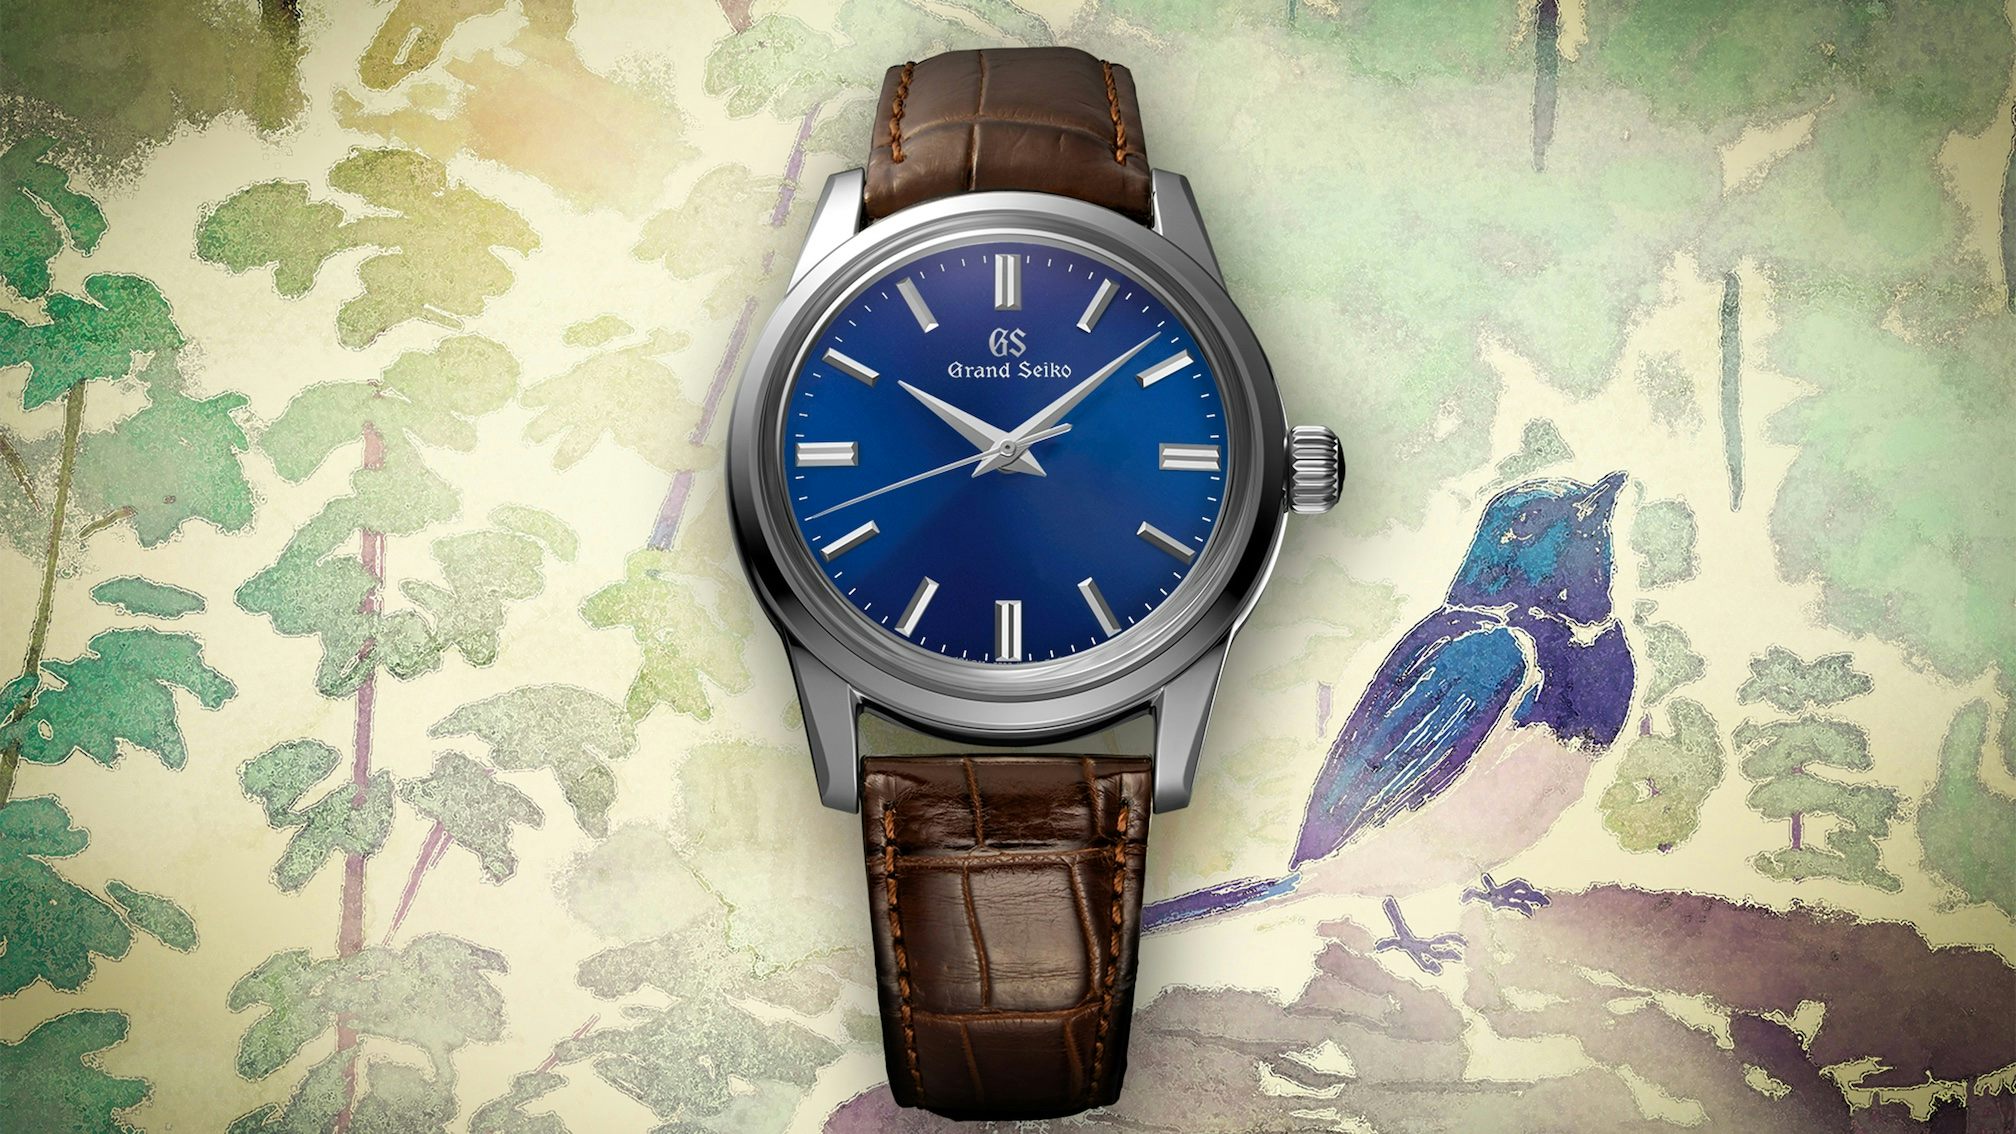 Grand Seiko introduces the SBGW279 Special Edition